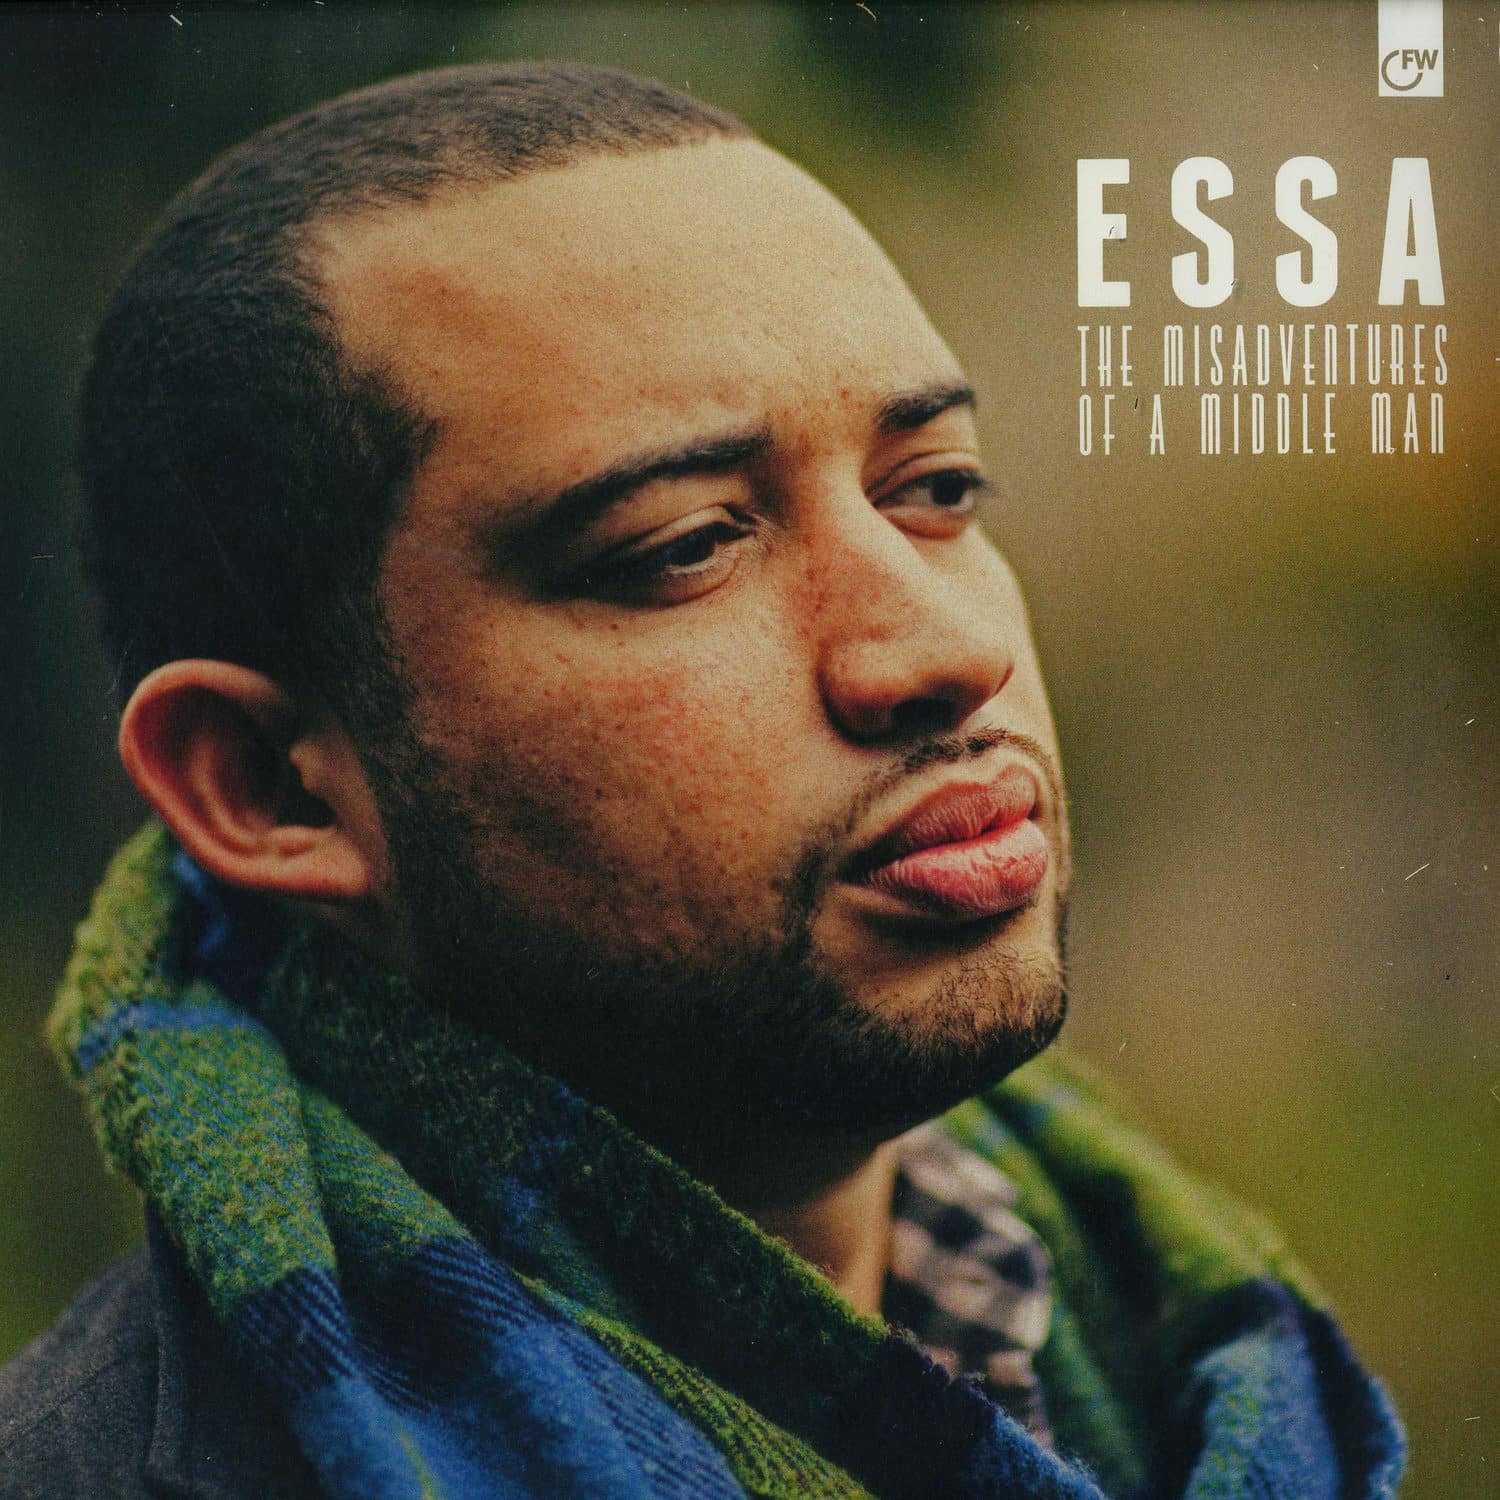 Essa - THE MISADVENTURES OF A MIDDLE MAN 